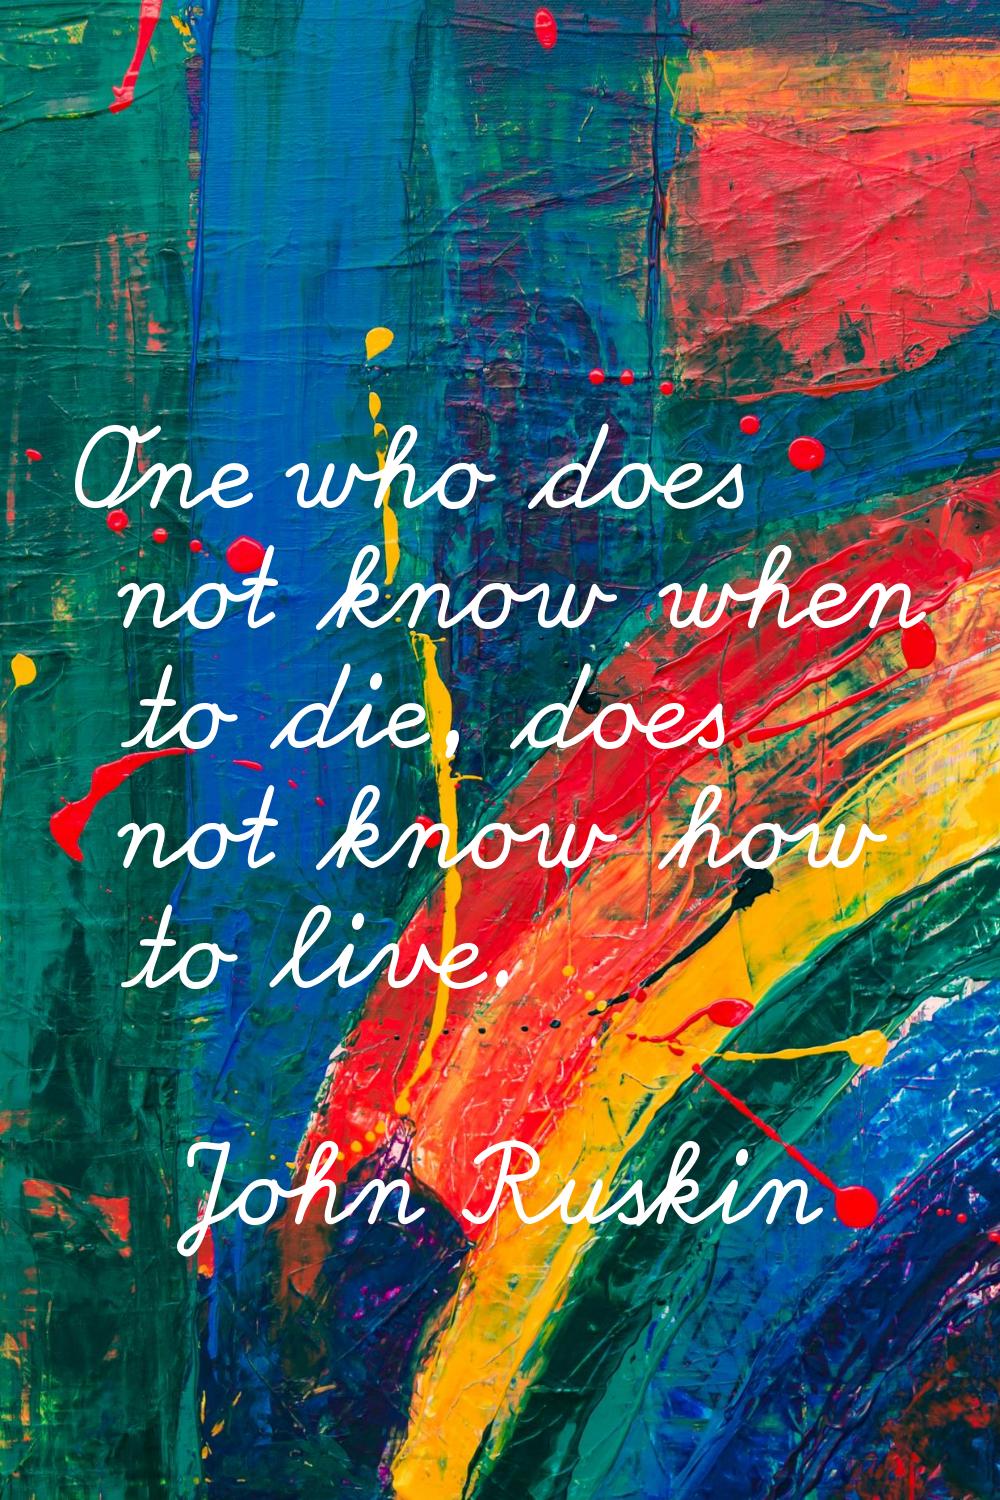 One who does not know when to die, does not know how to live.